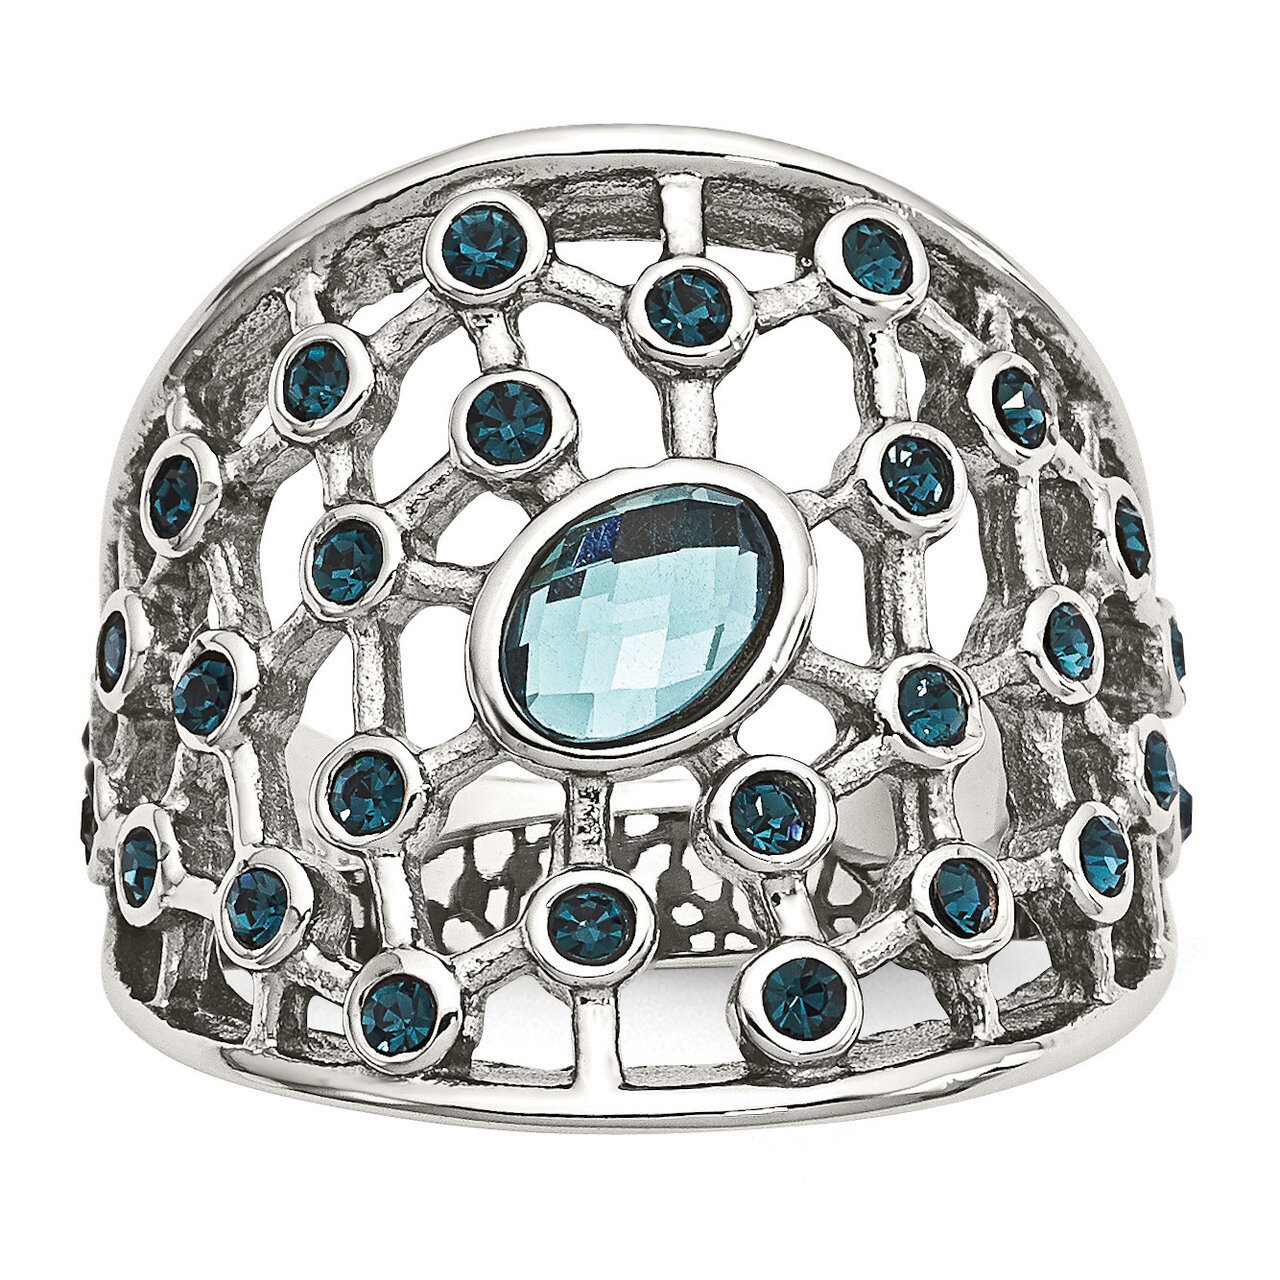 Polished Blue Glass and Preciosa Crystal Ring Stainless Steel SR592-6